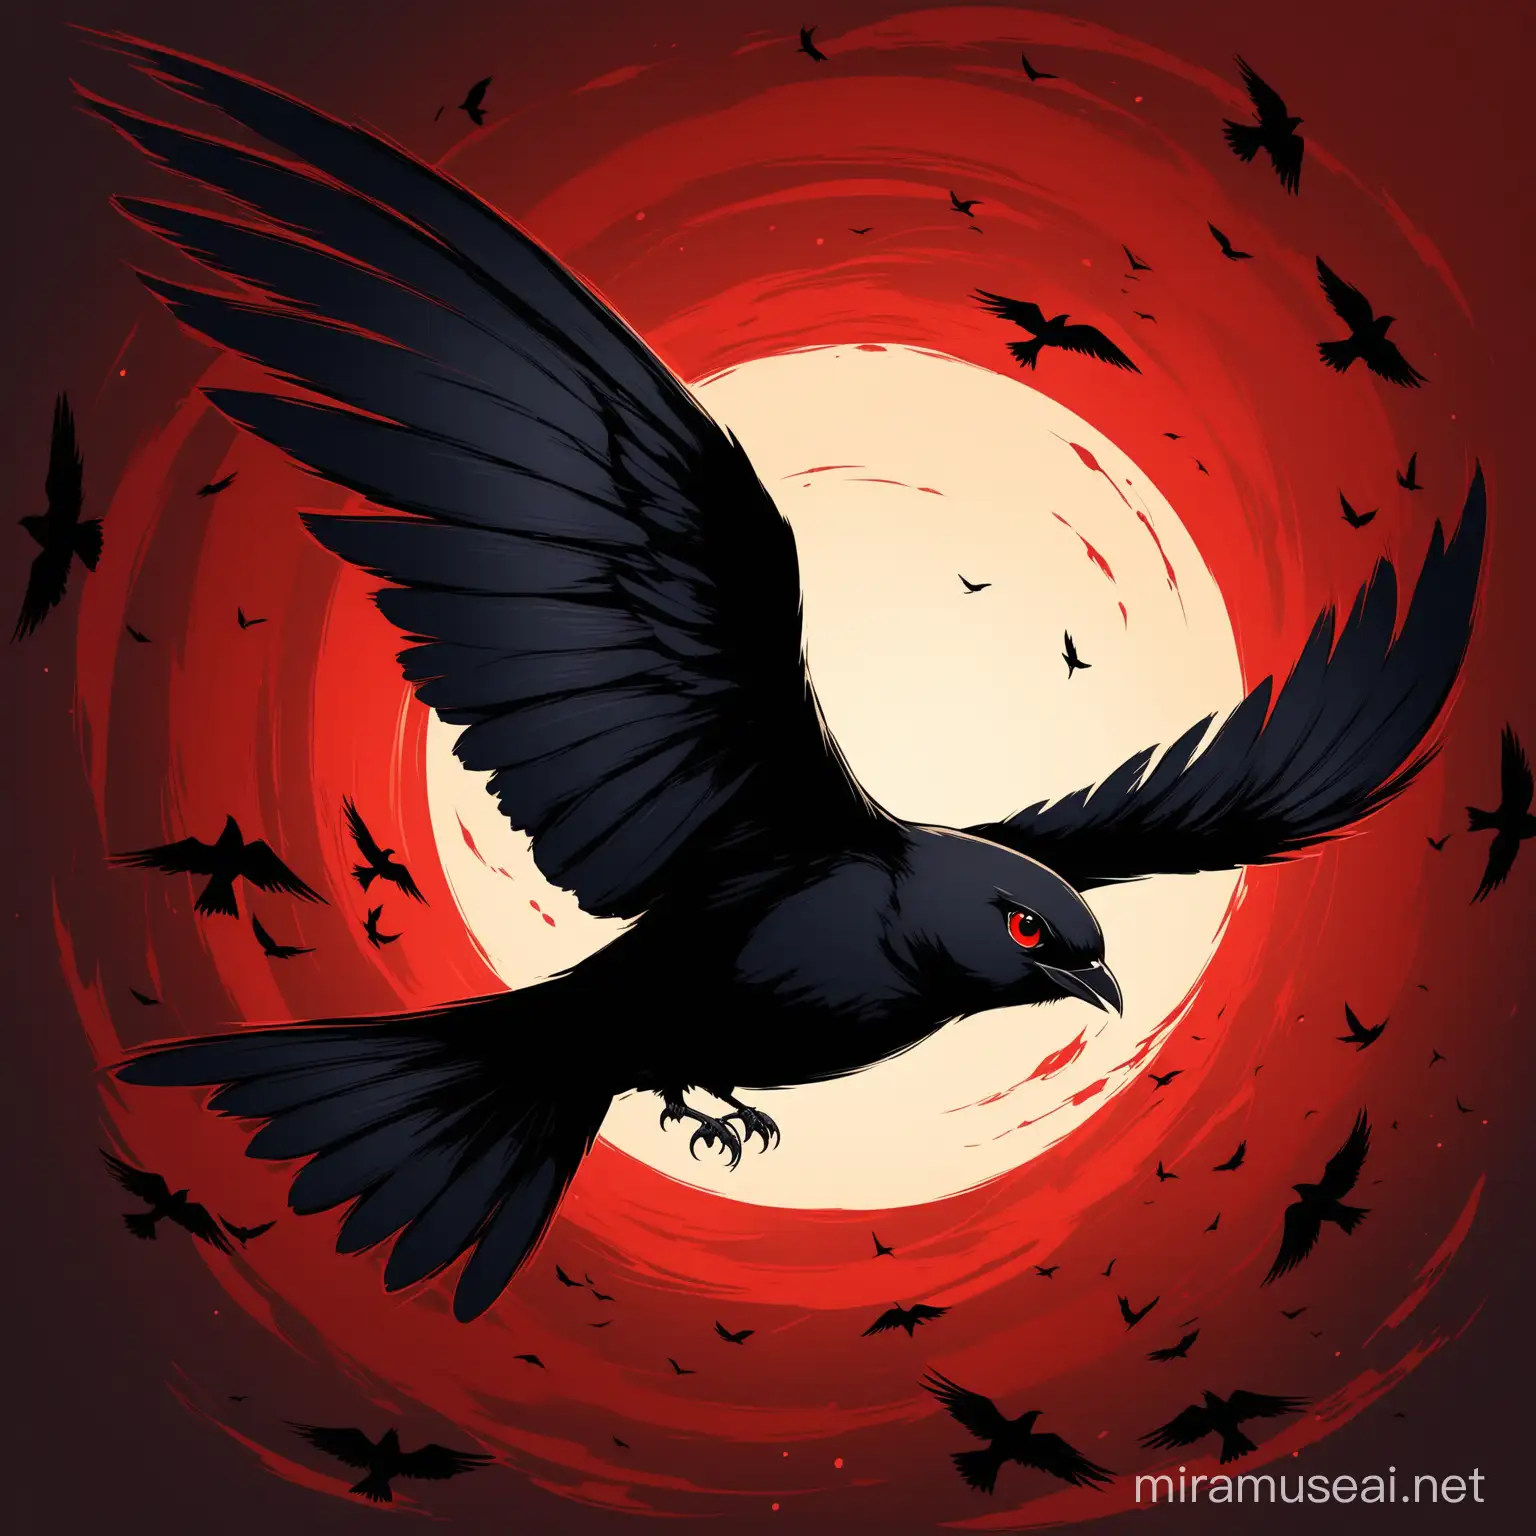 Logo: a fantasy black swallow flying up (bird) with red eyes with power of darkness
